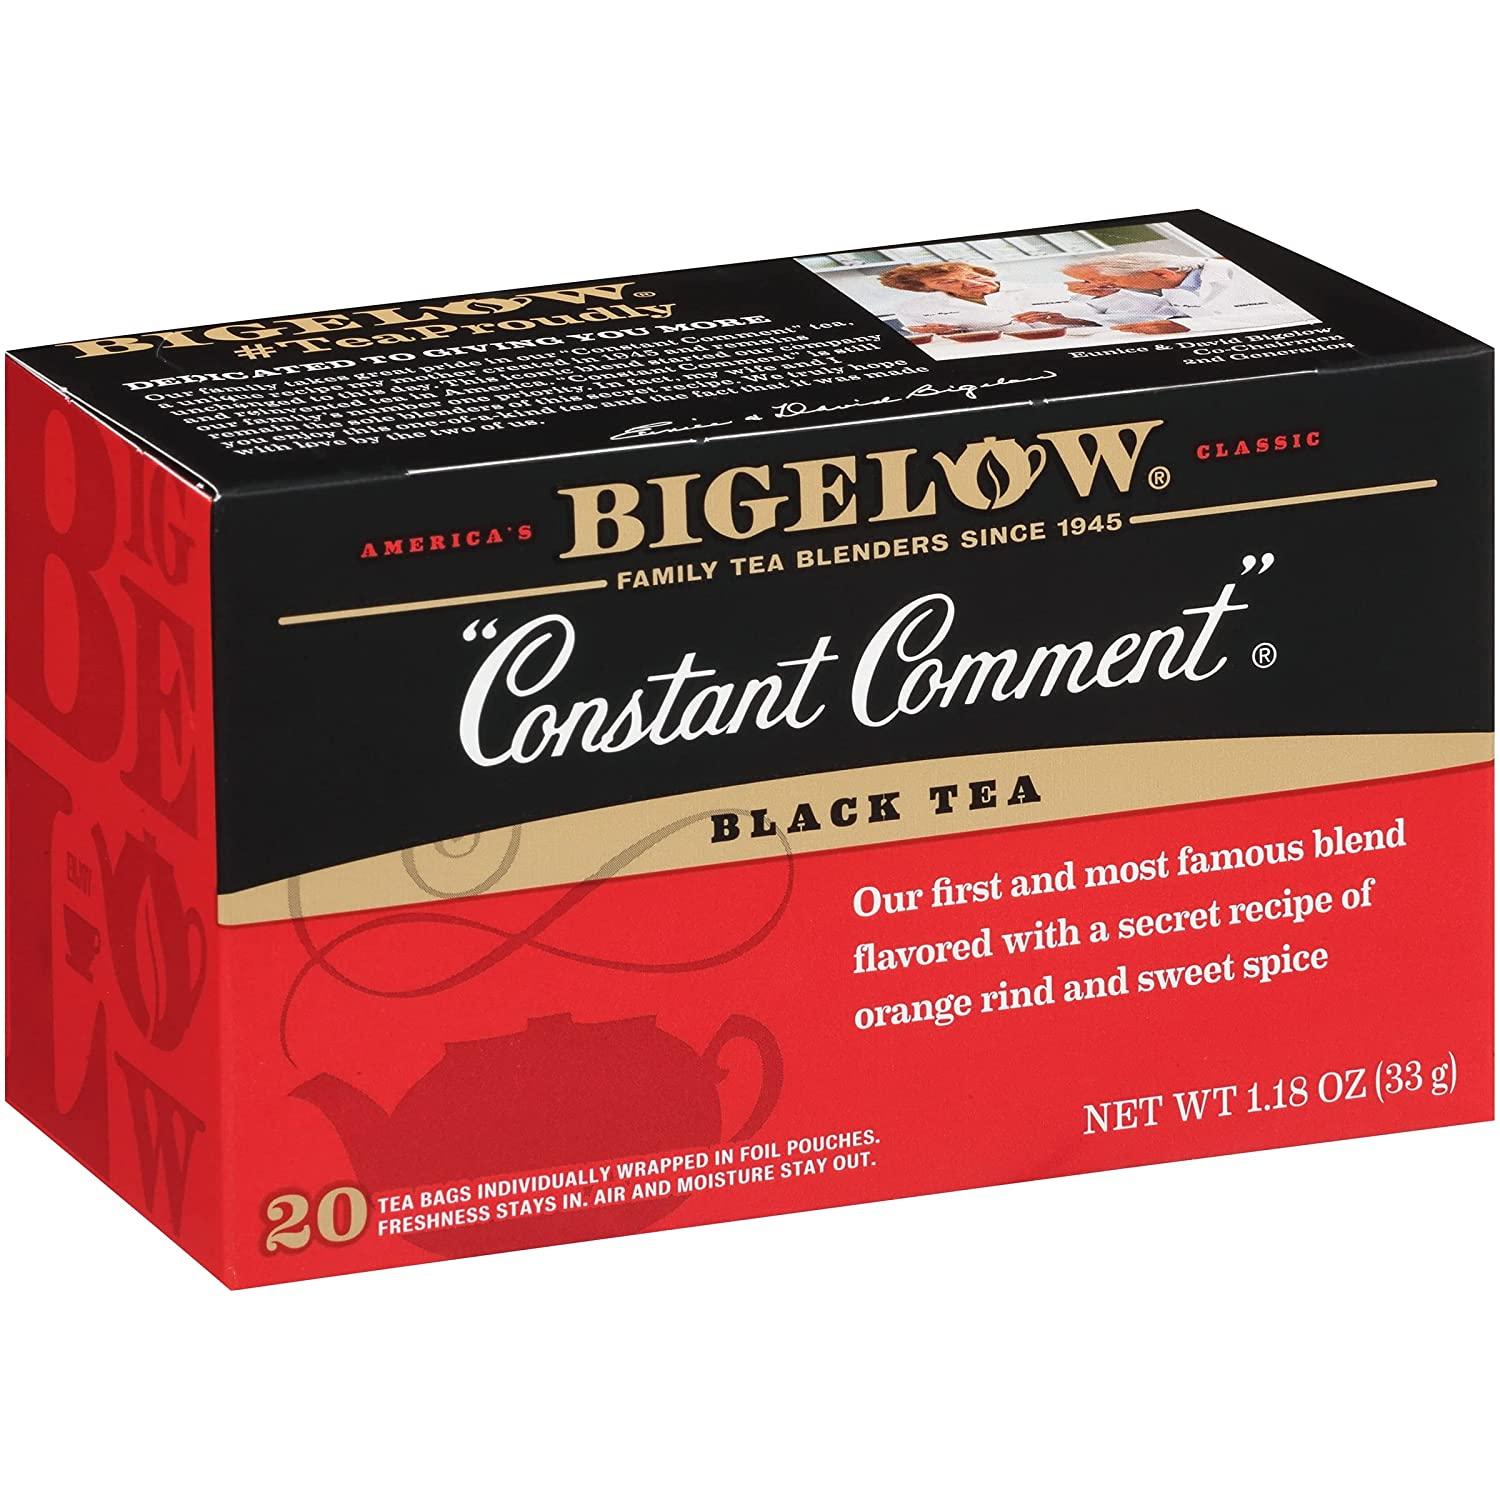 120 Bigelow Tea Constant Comment Caffeinated Black Tea Bags for $7.54 Shipped